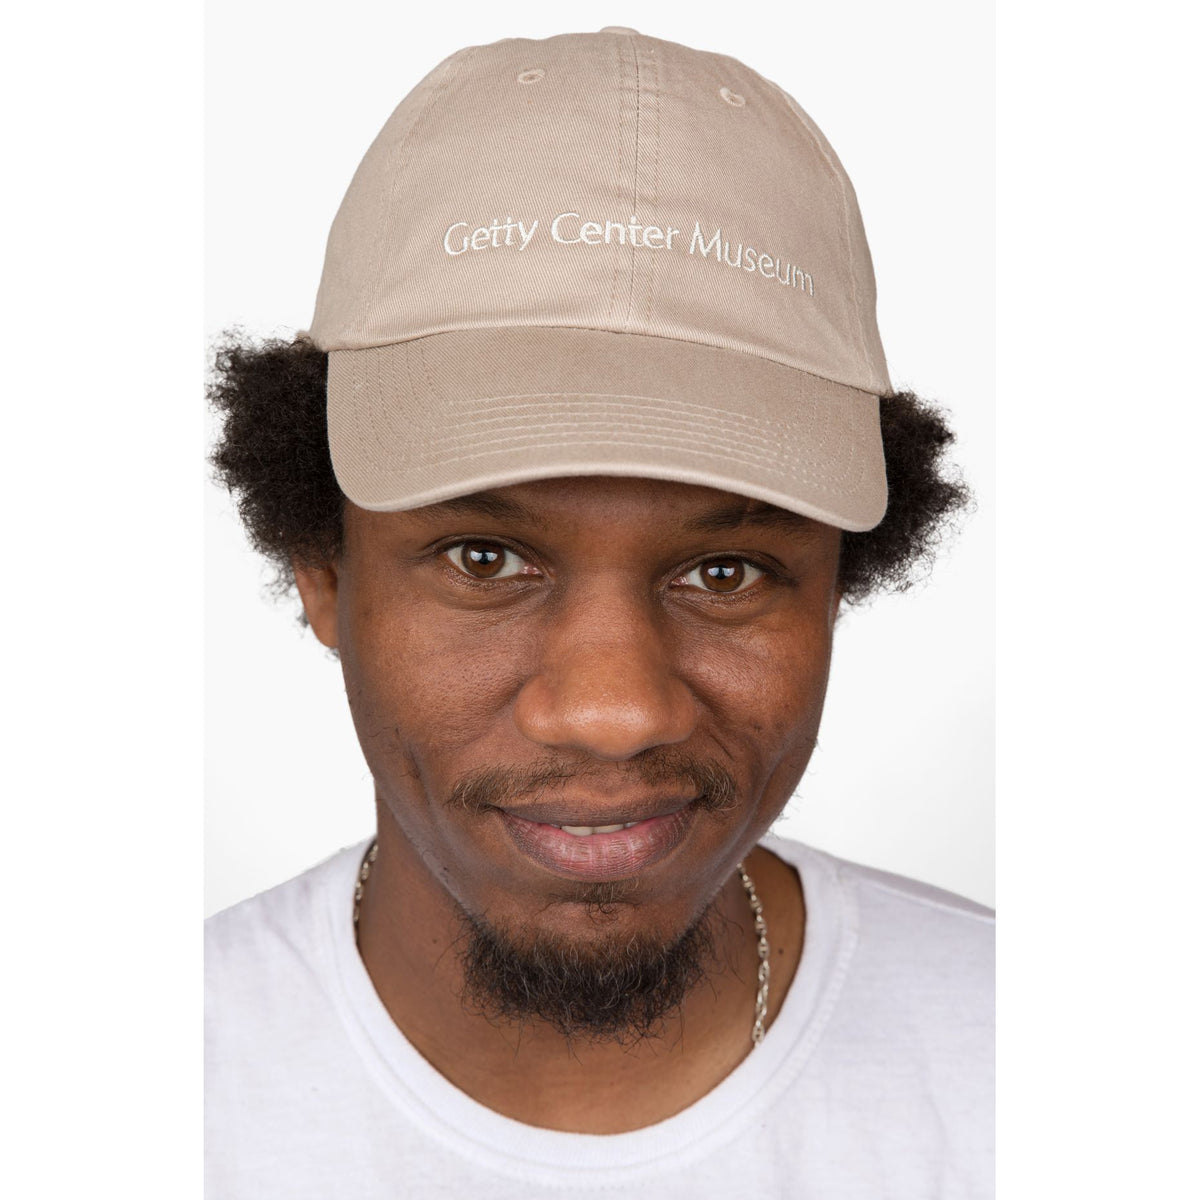 Getty Center Museum Embroidered Logo Cap